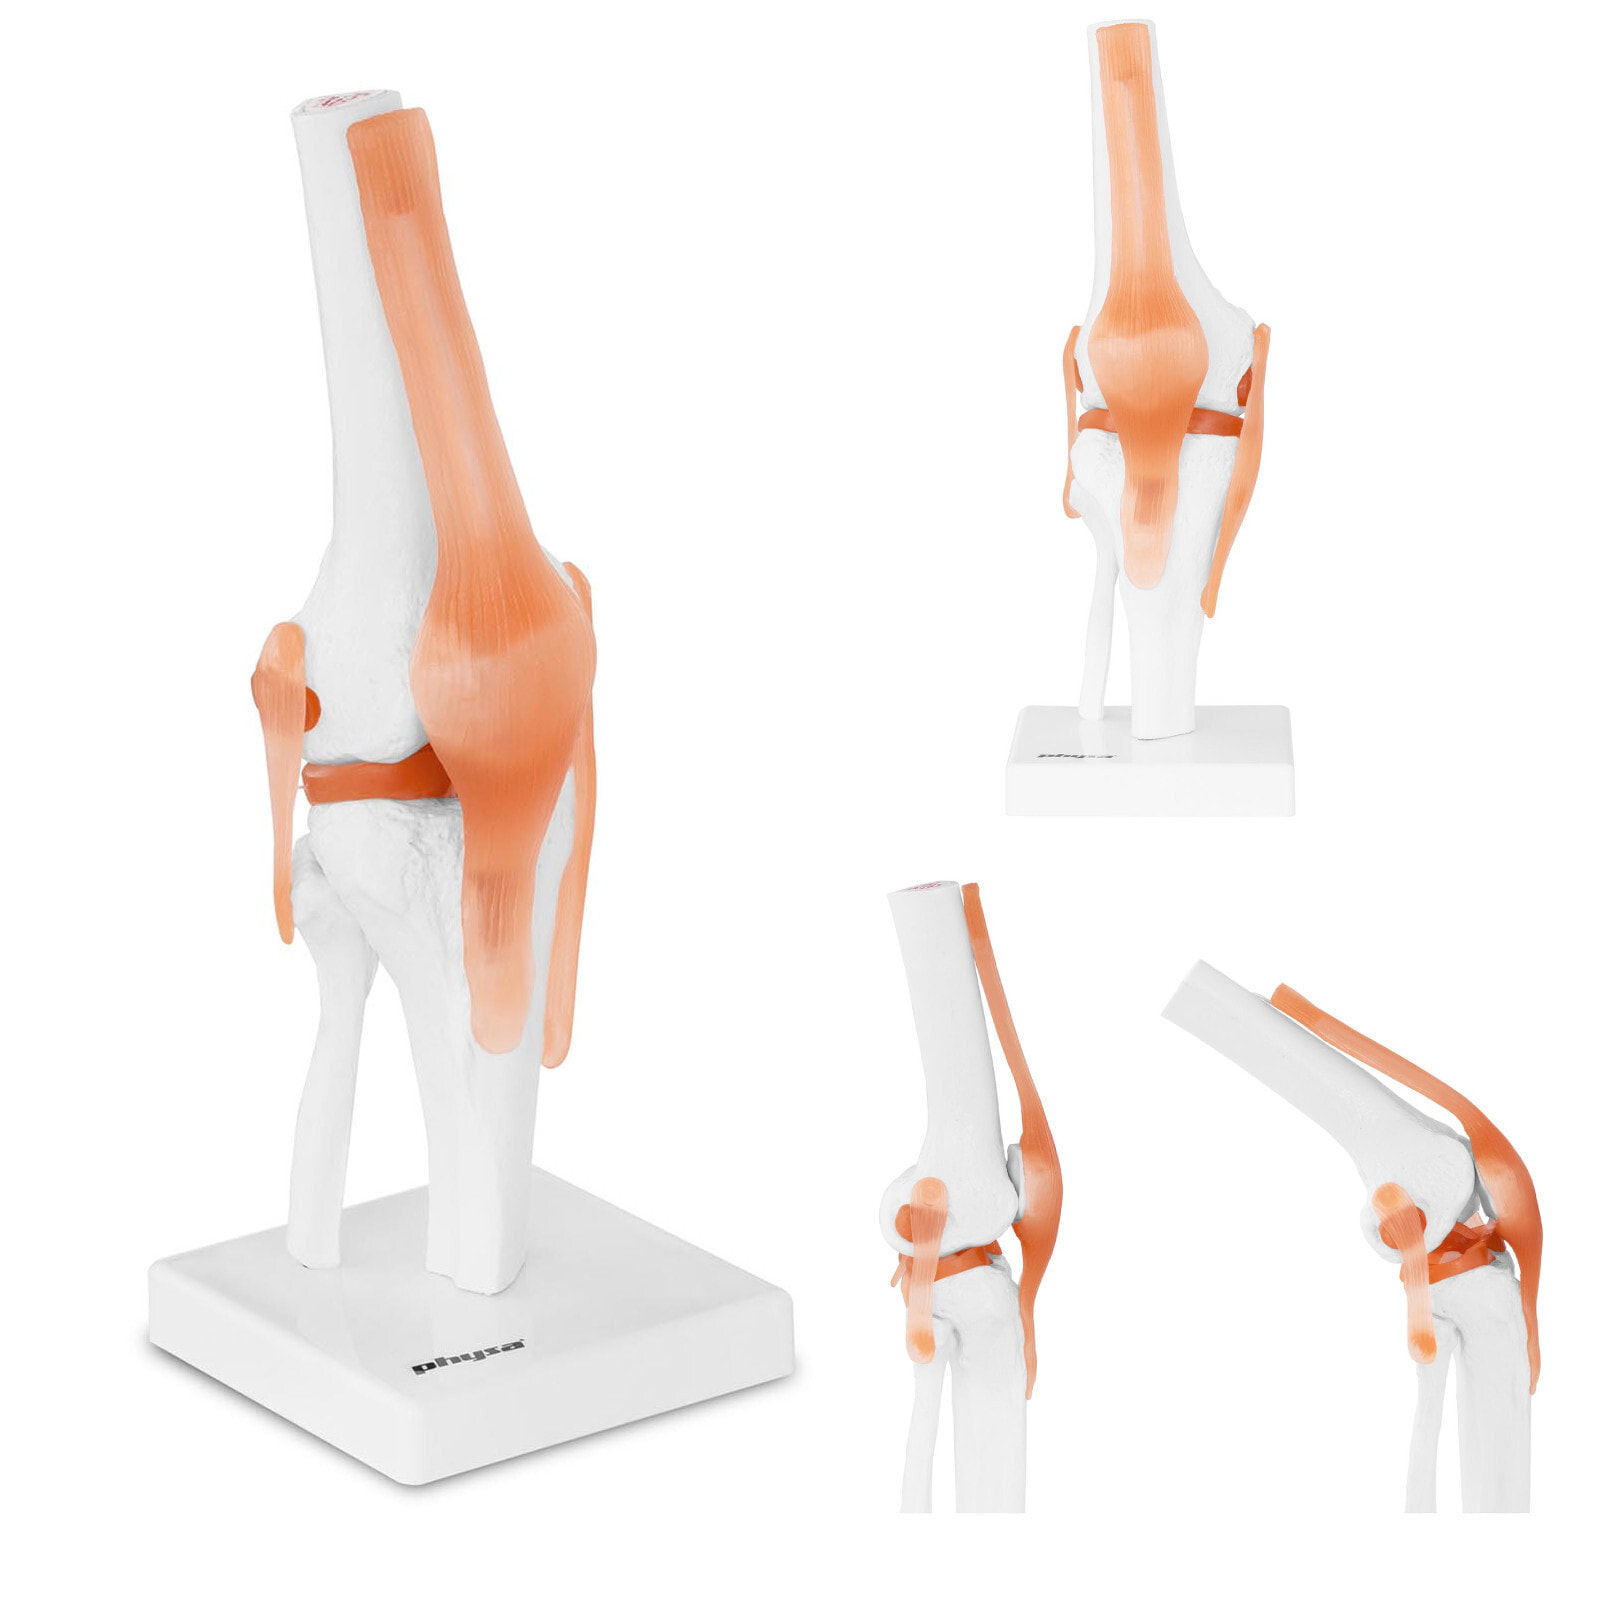 Anatomical model of the knee joint, scale 1: 1